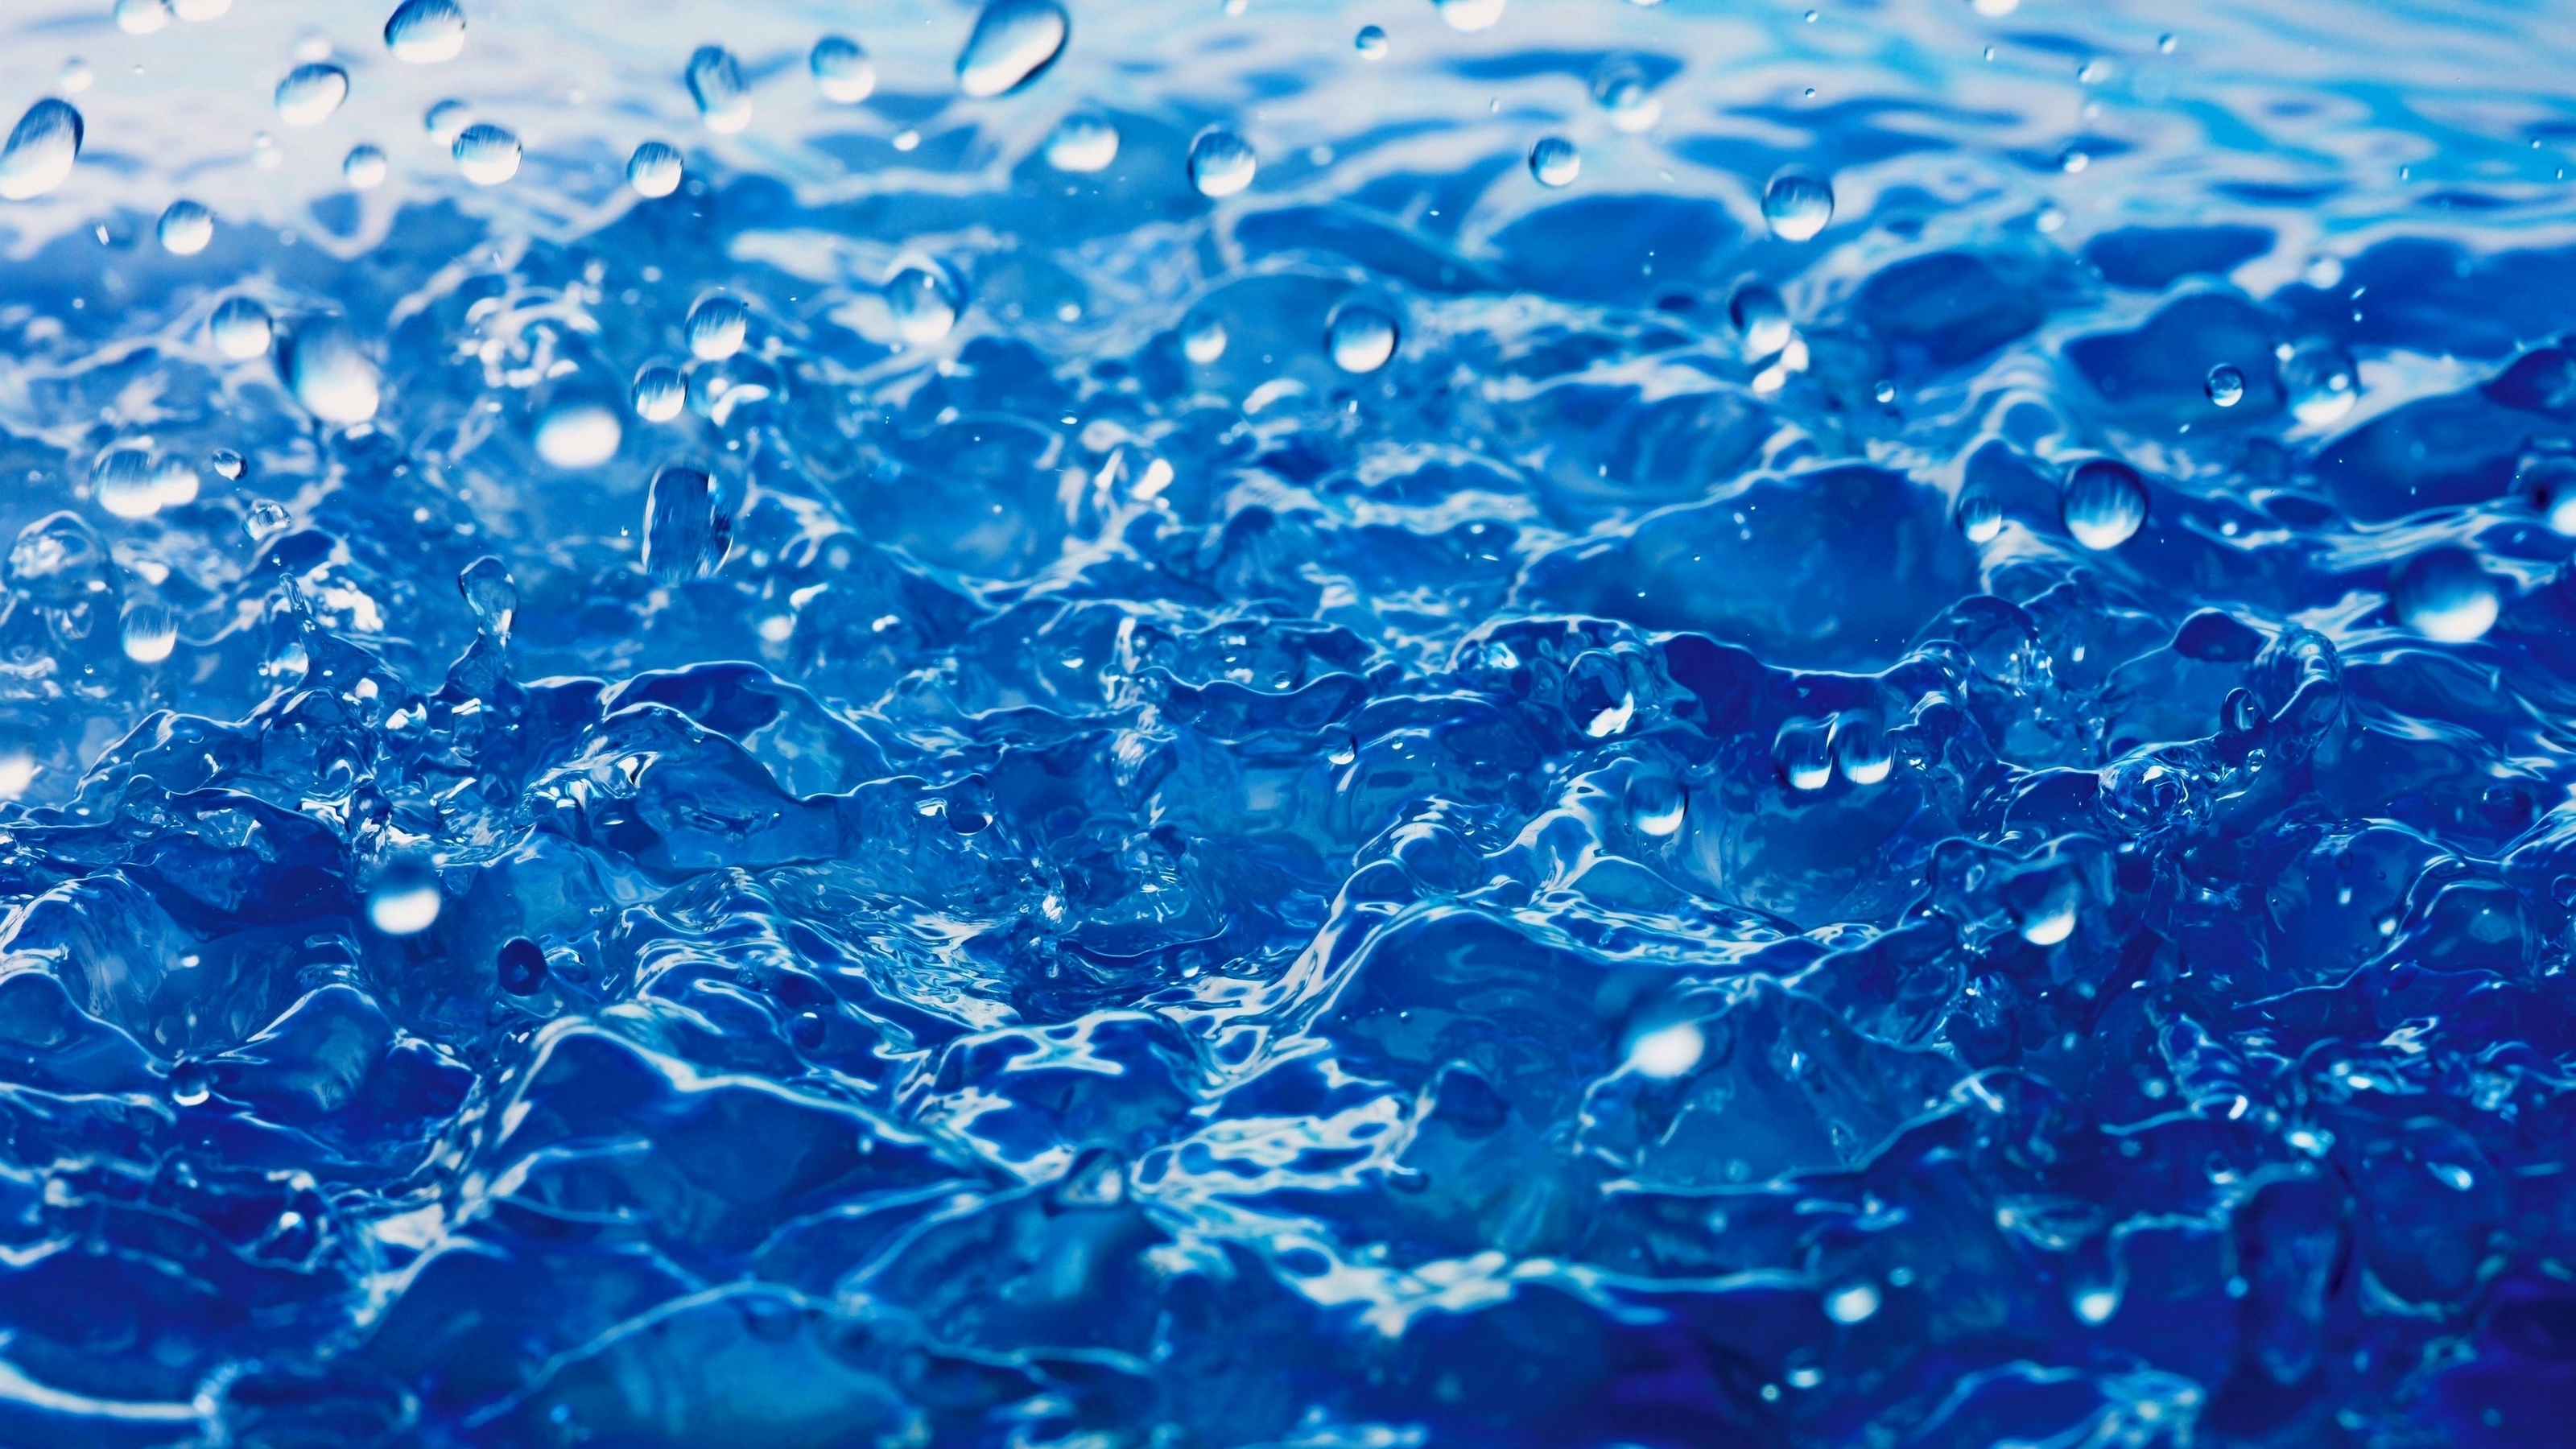 Image: Water, blue, drops, clean